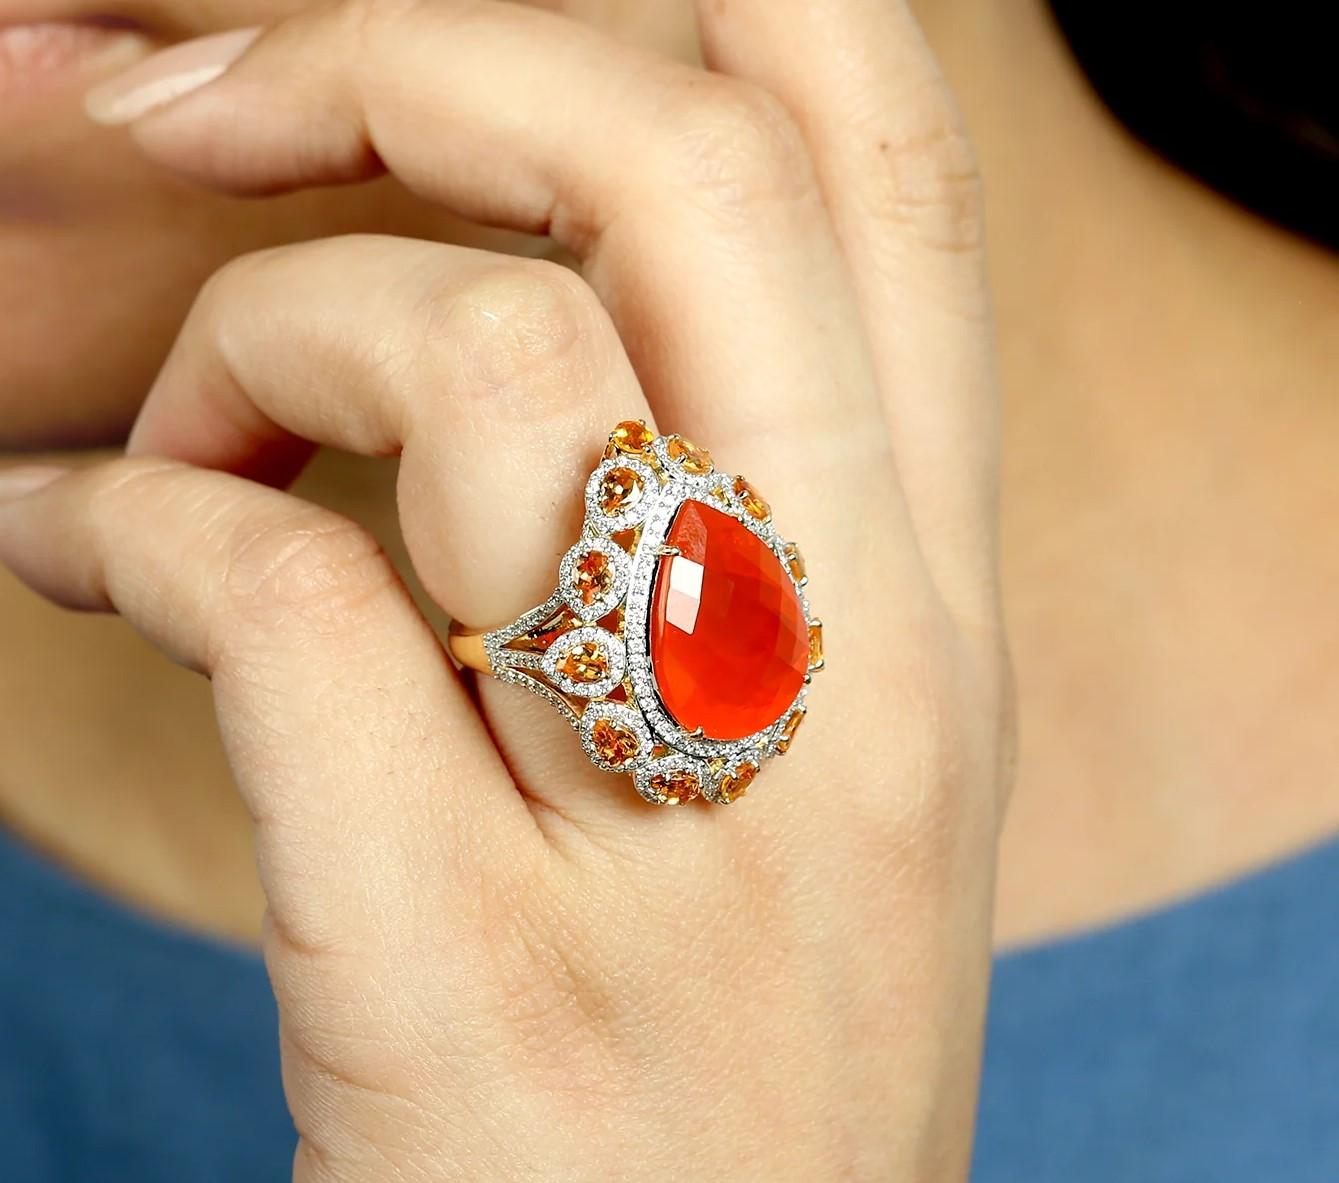 This exquisite ring is handcrafted in 18-karat gold. It is set in 11.16 carats fire opal, garnet and 1.38 carats of sparkling diamonds.

FOLLOW MEGHNA JEWELS storefront to view the latest collection & exclusive pieces. Meghna Jewels is proudly rated